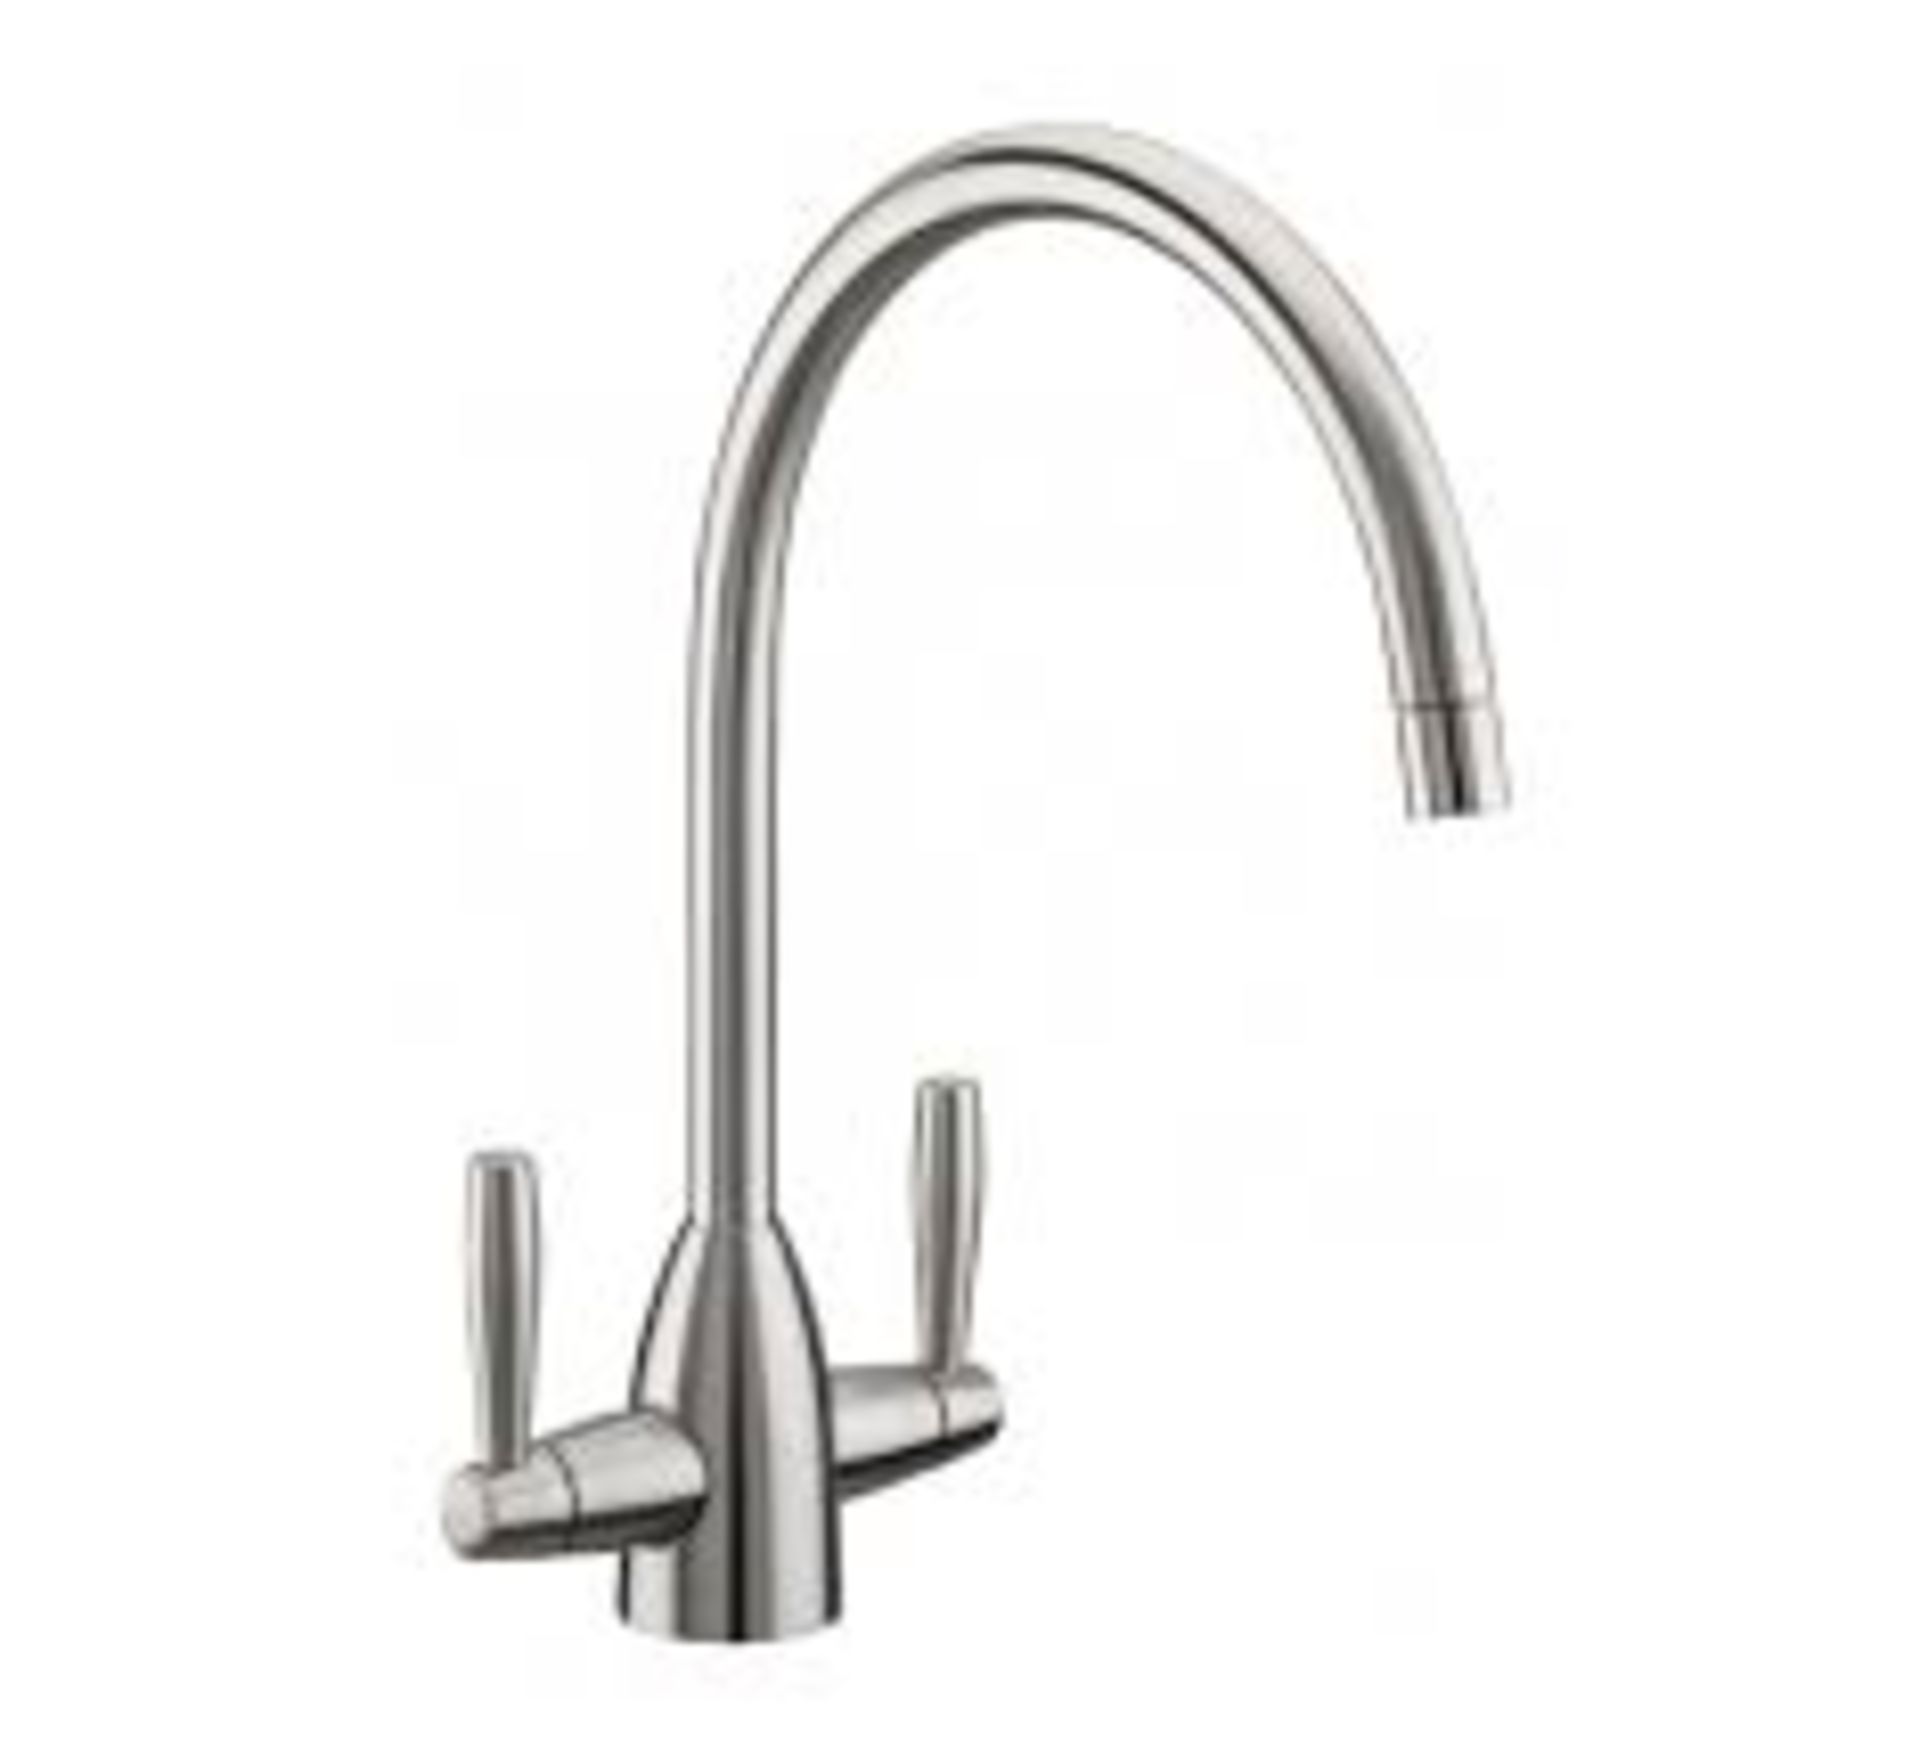 Boxed Nzone Mono Sink Tap in Brushed Nickel RRP £65 (16416) (Public Viewing and Appraisals